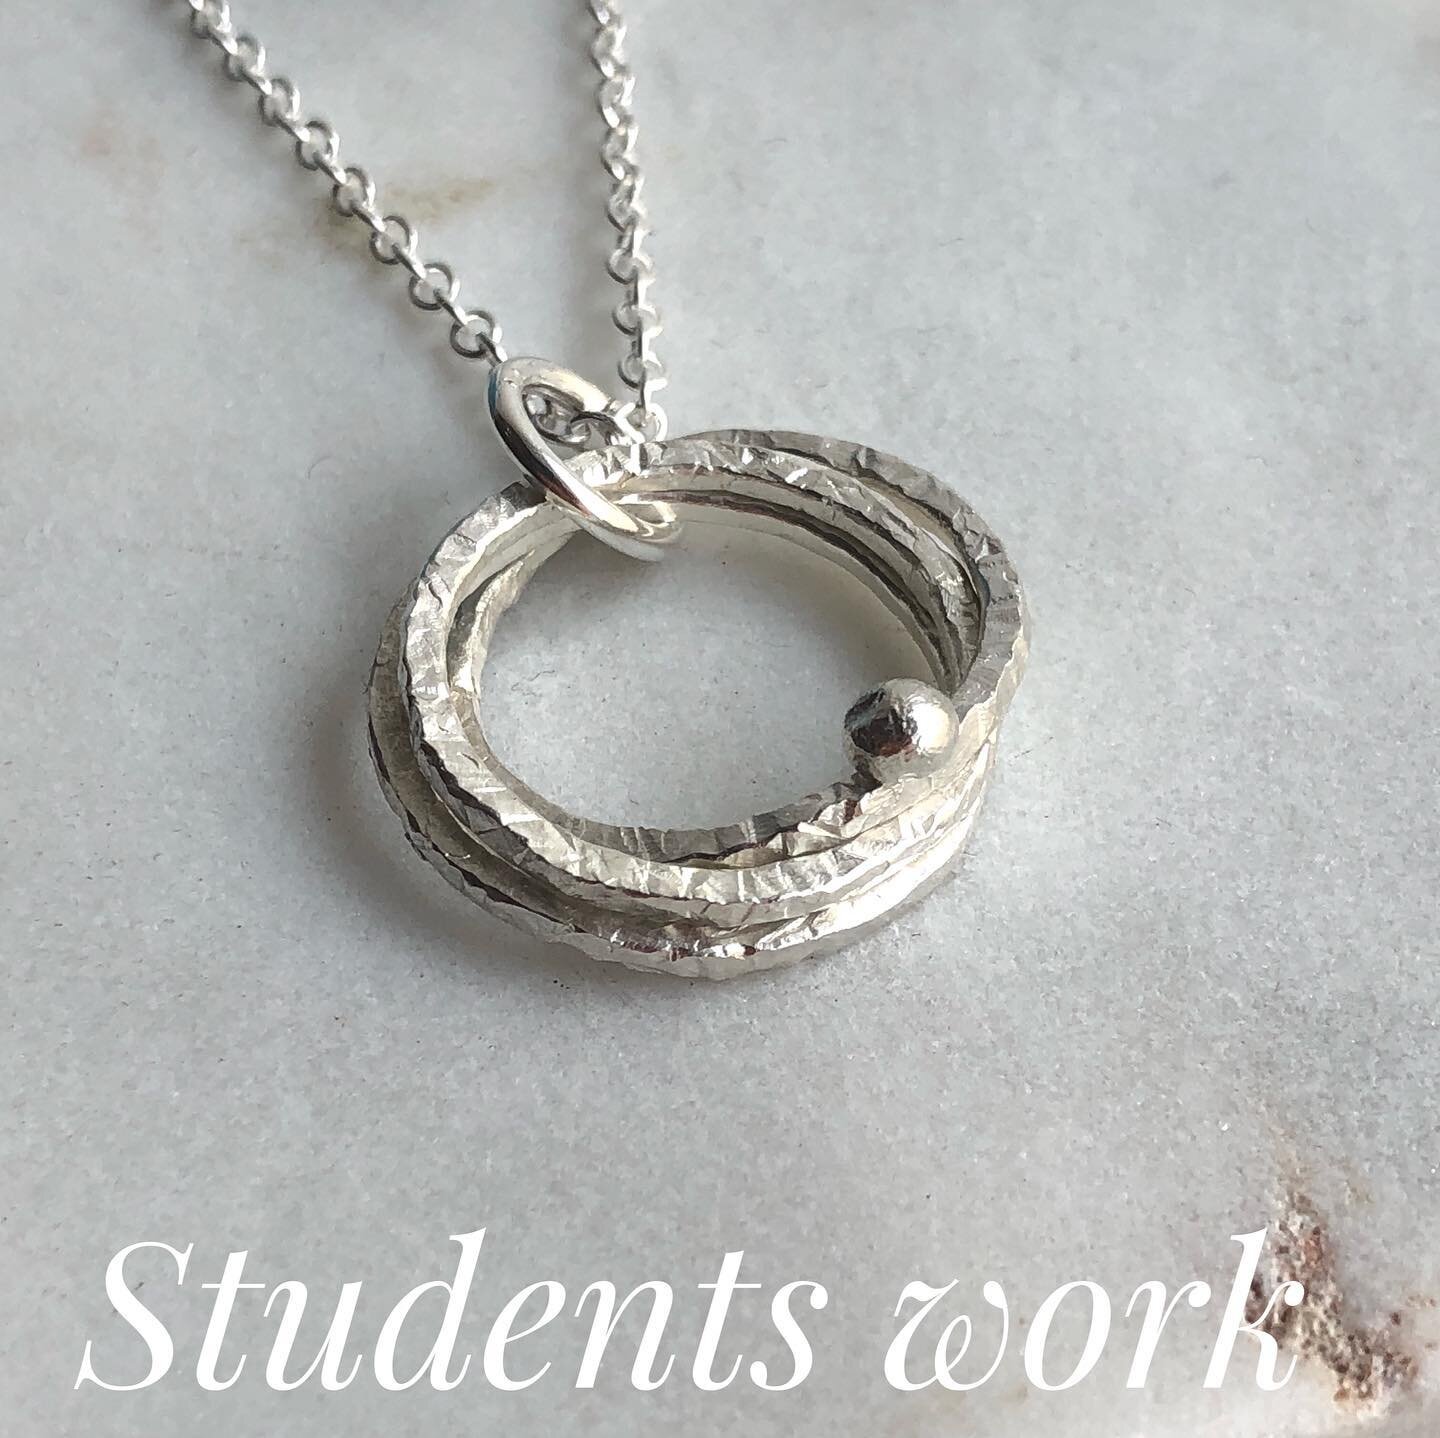 I love this necklace that came out of our last Pendant vs Earring workshop
The interlocked rings were for her, her husband and her son and she placed a small silver ball on the one for her boy.
Such a lovely piece 💛